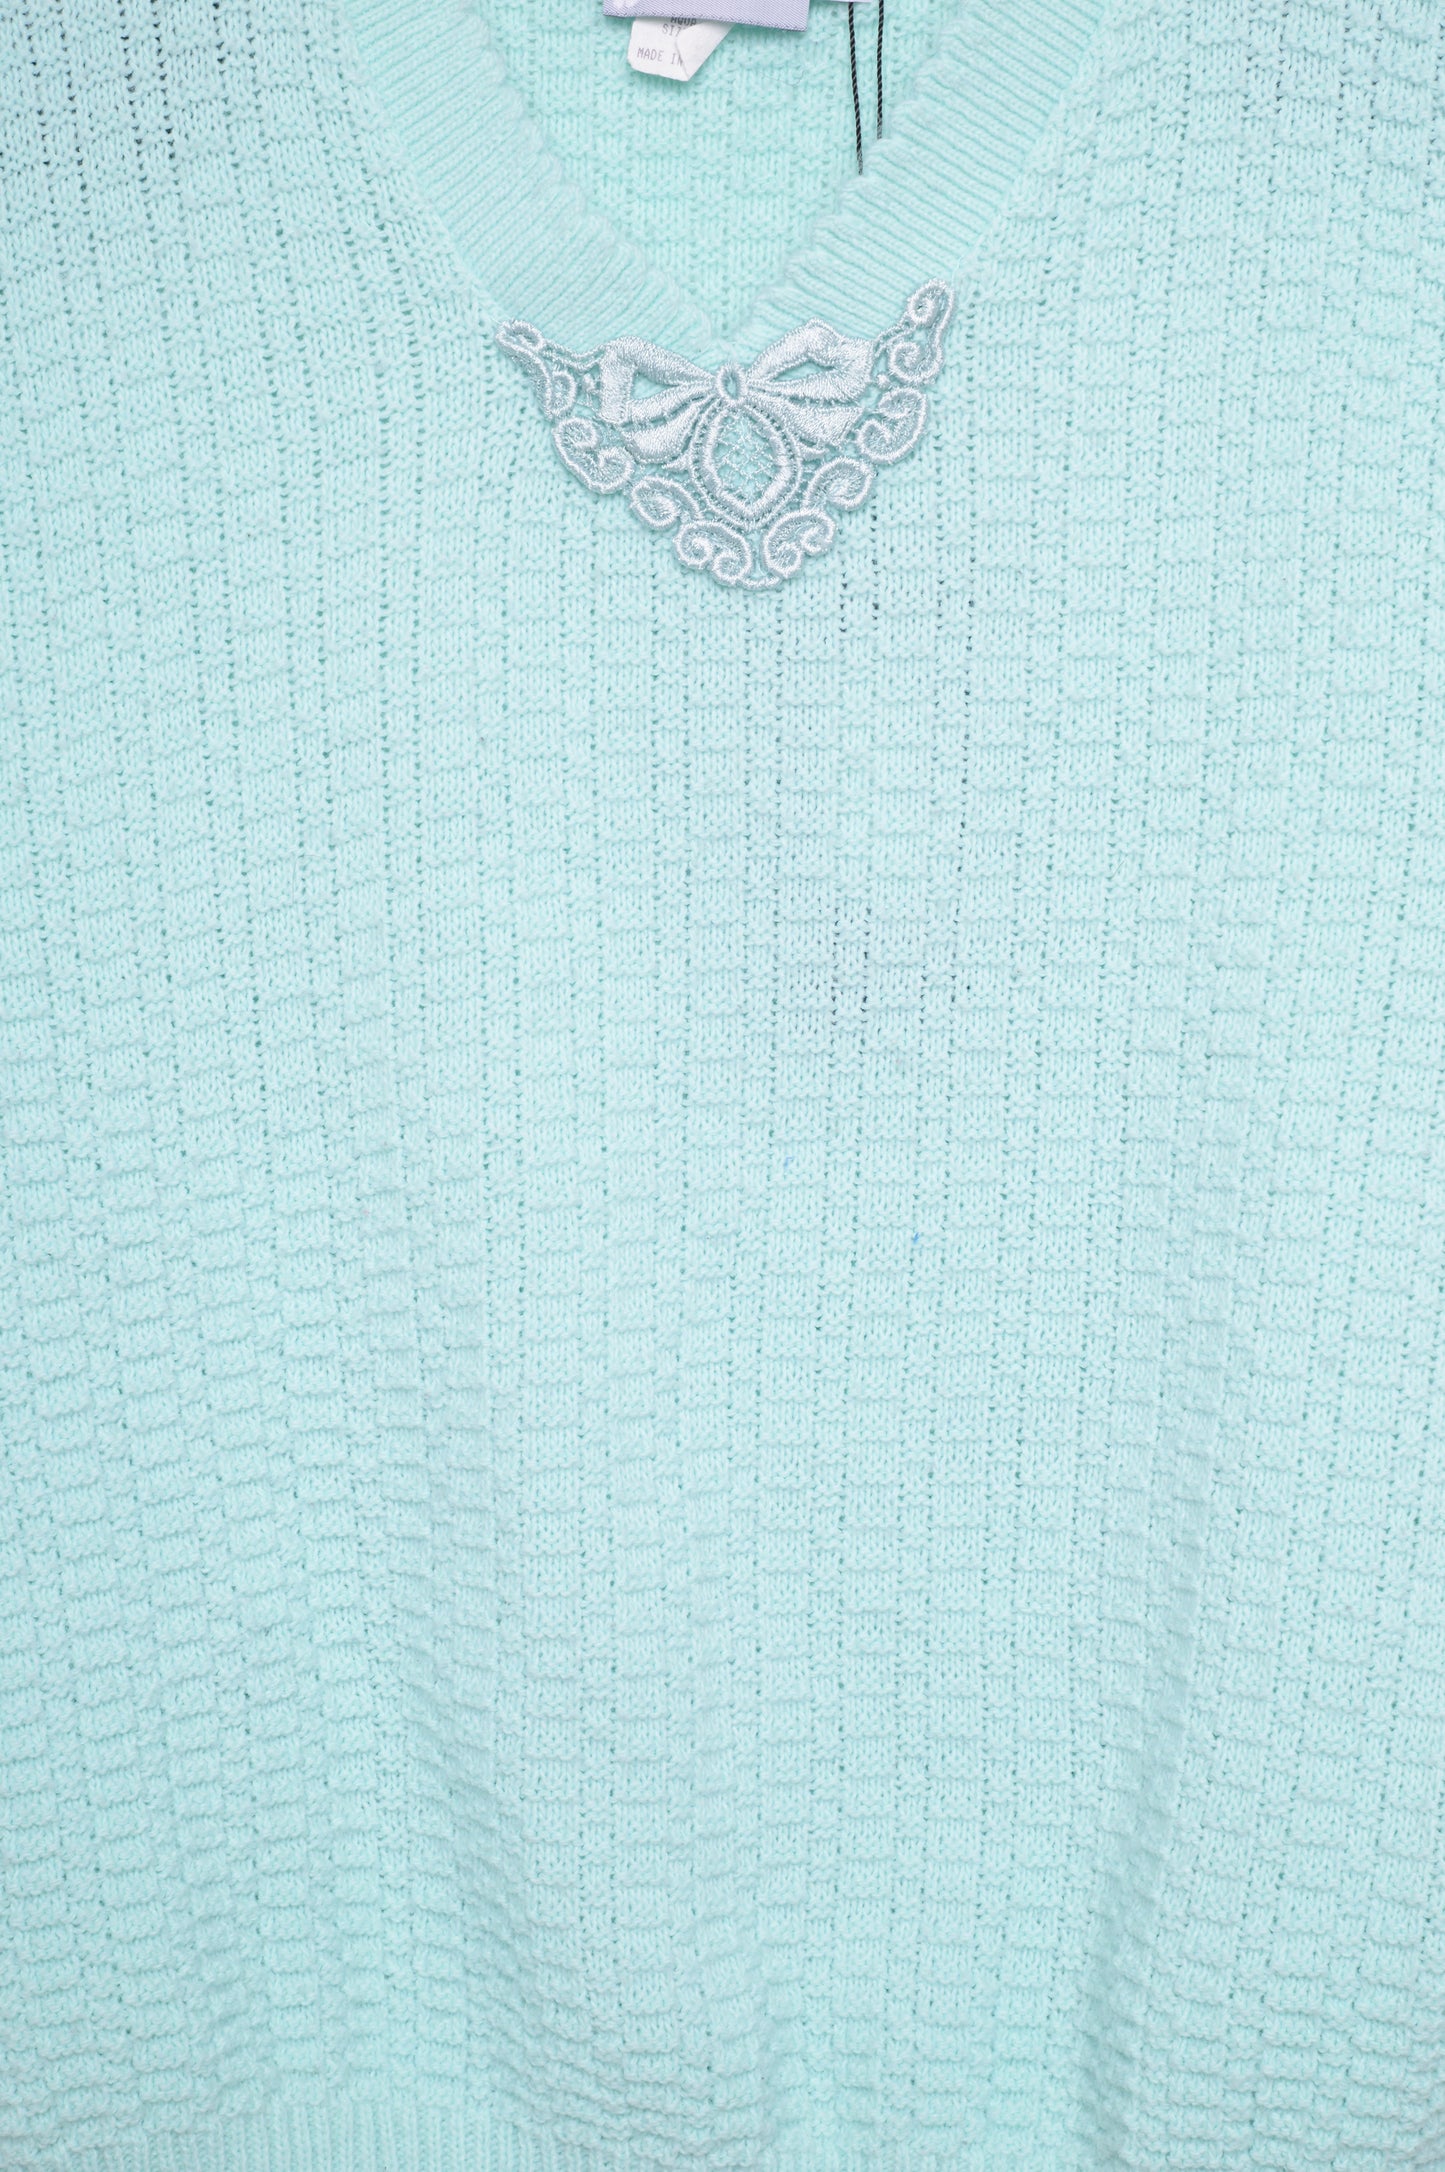 1980s Mint Cropped Knit Sweater